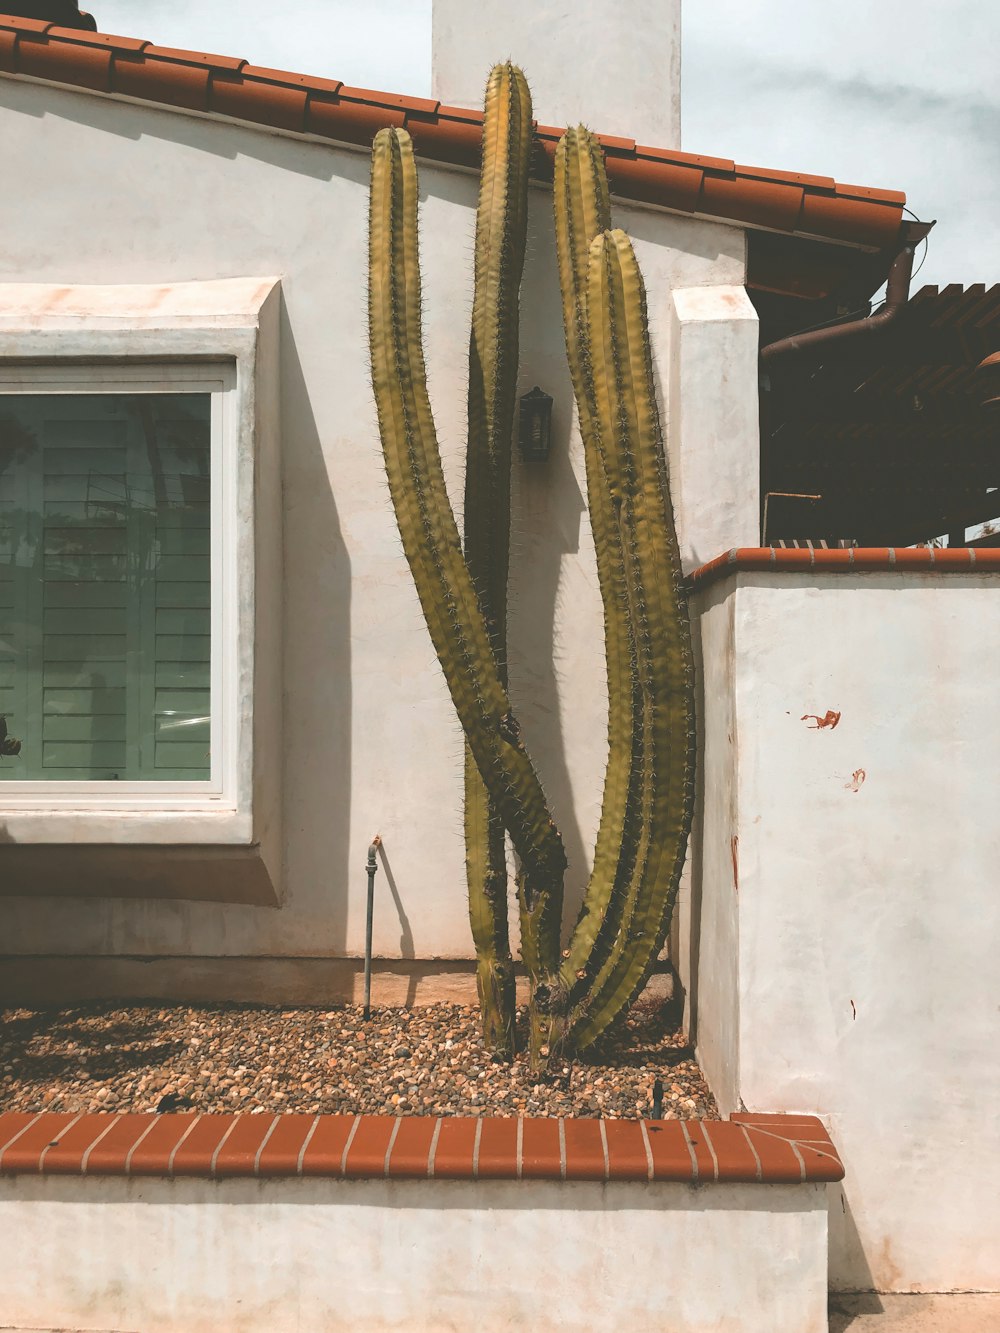 green cactus beside building wall